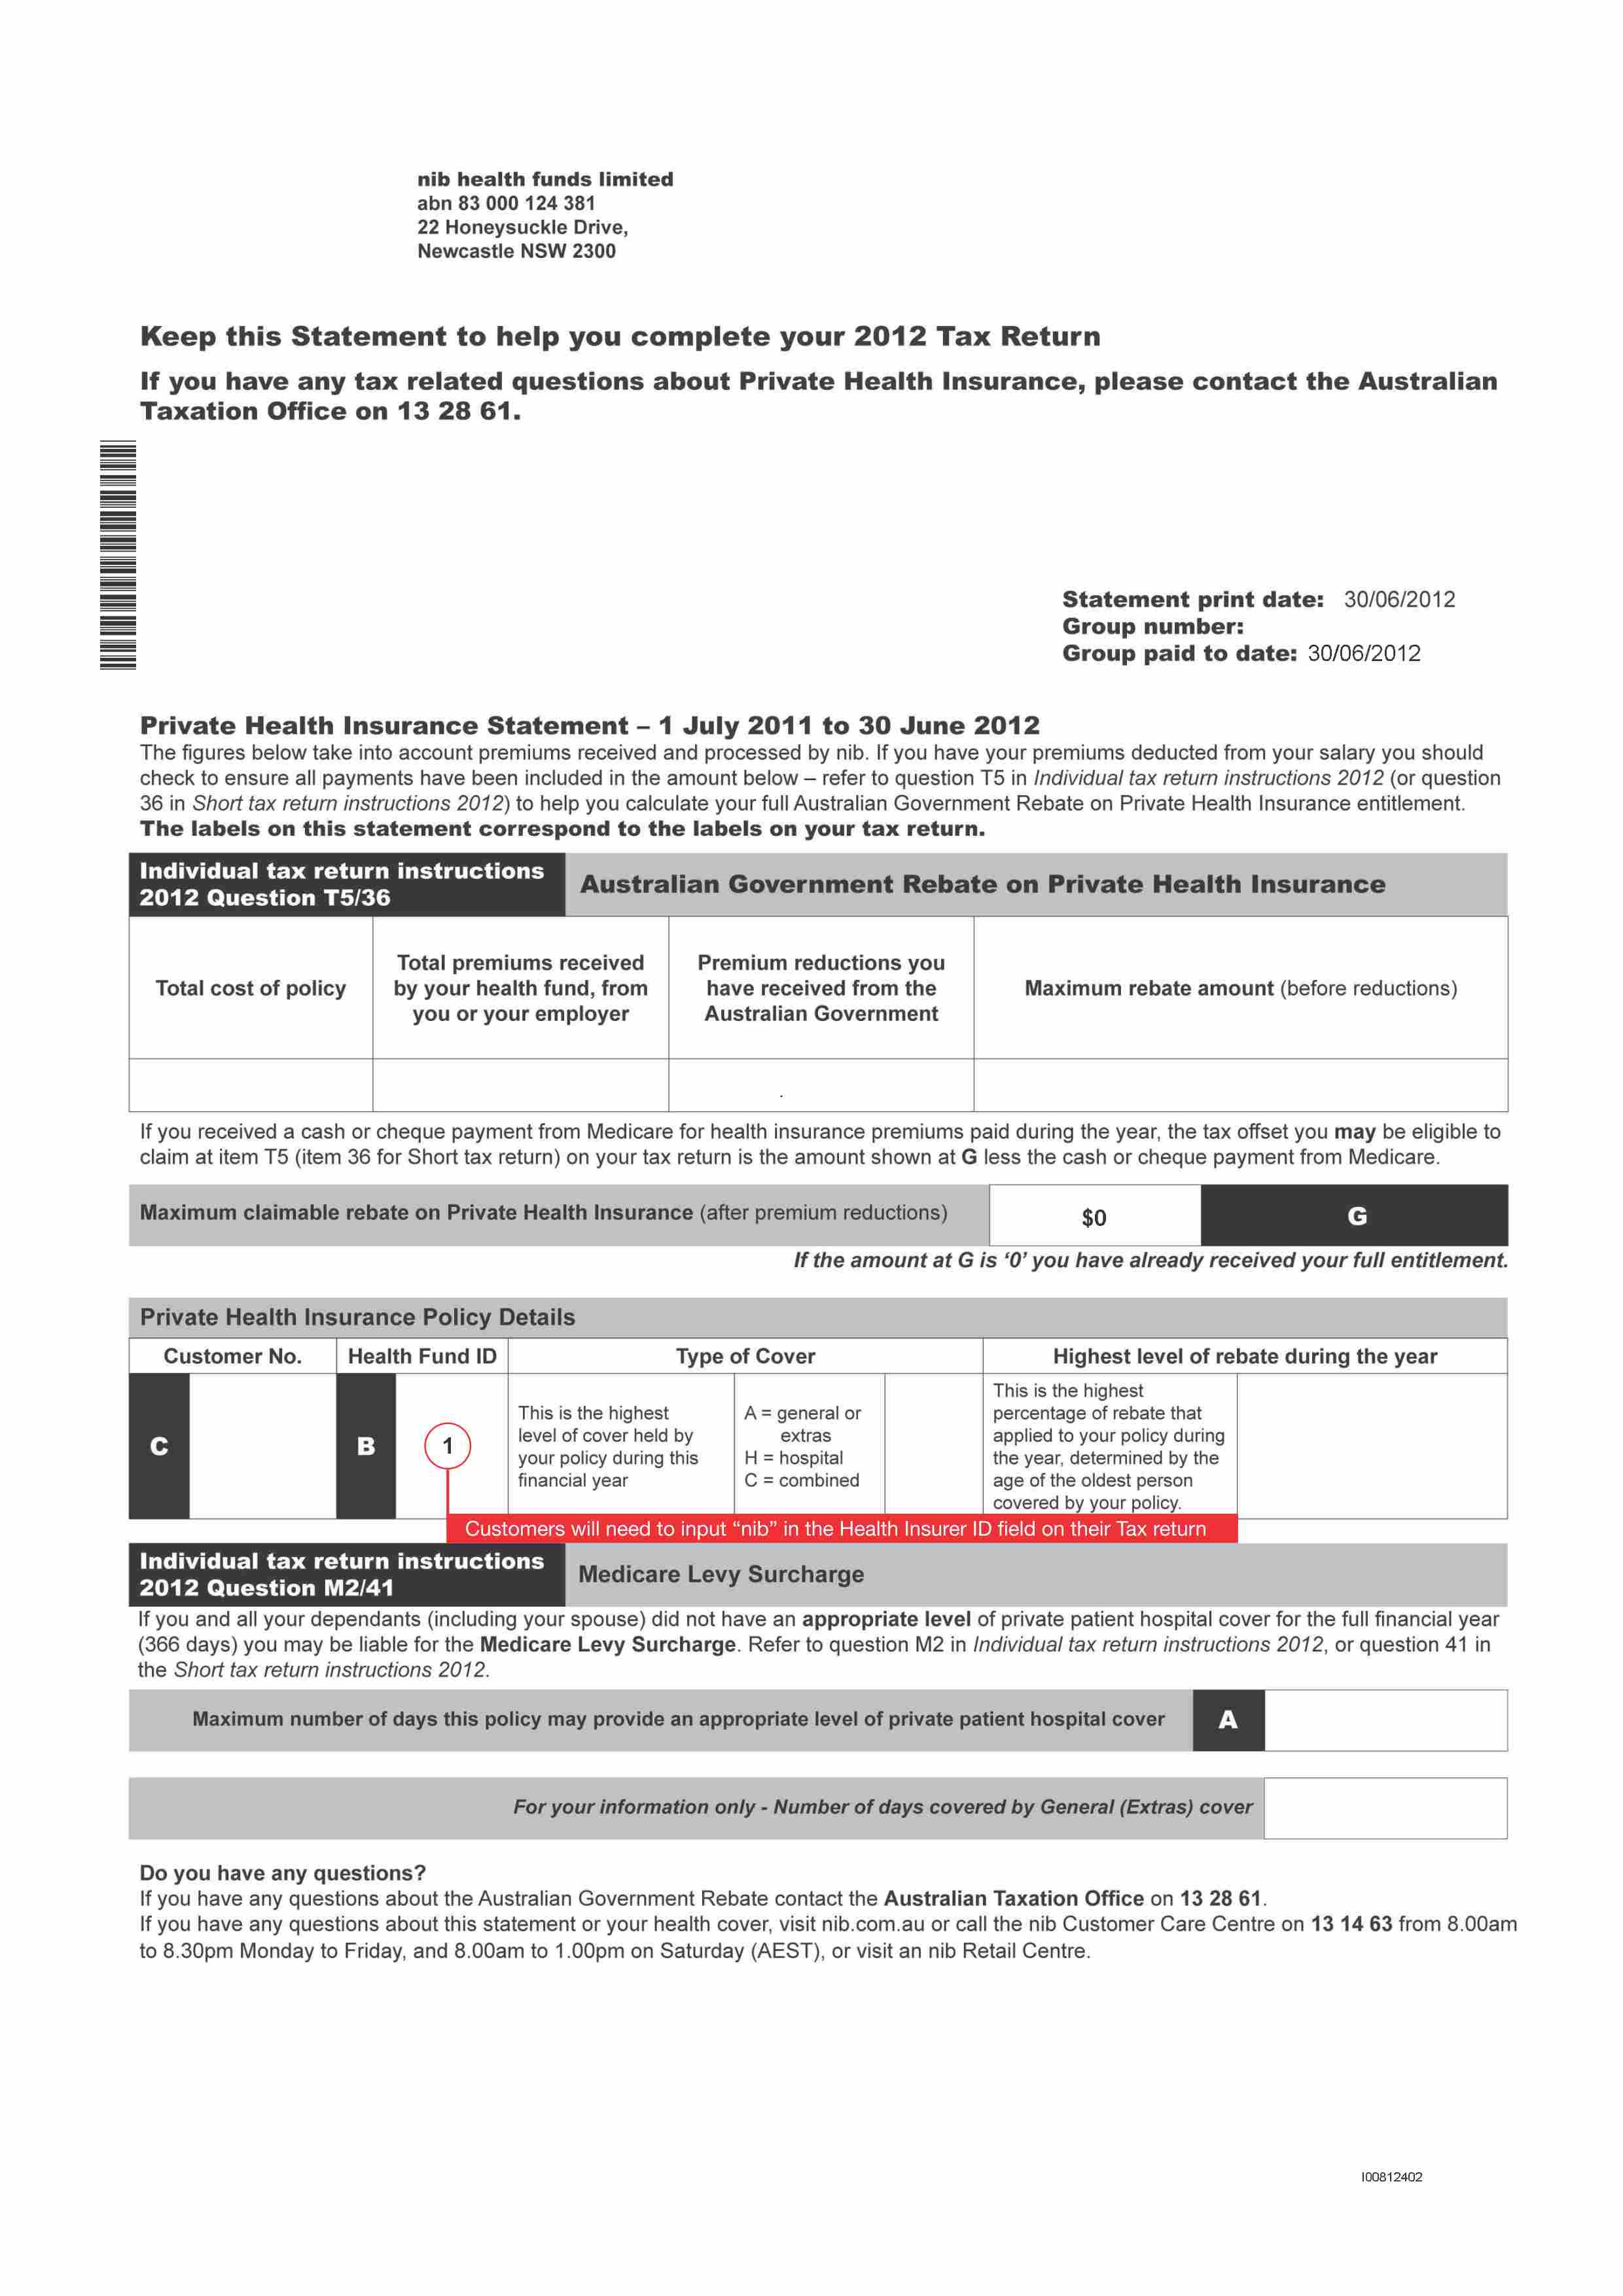 Health Insurance Statement For Tax / Download Instructions